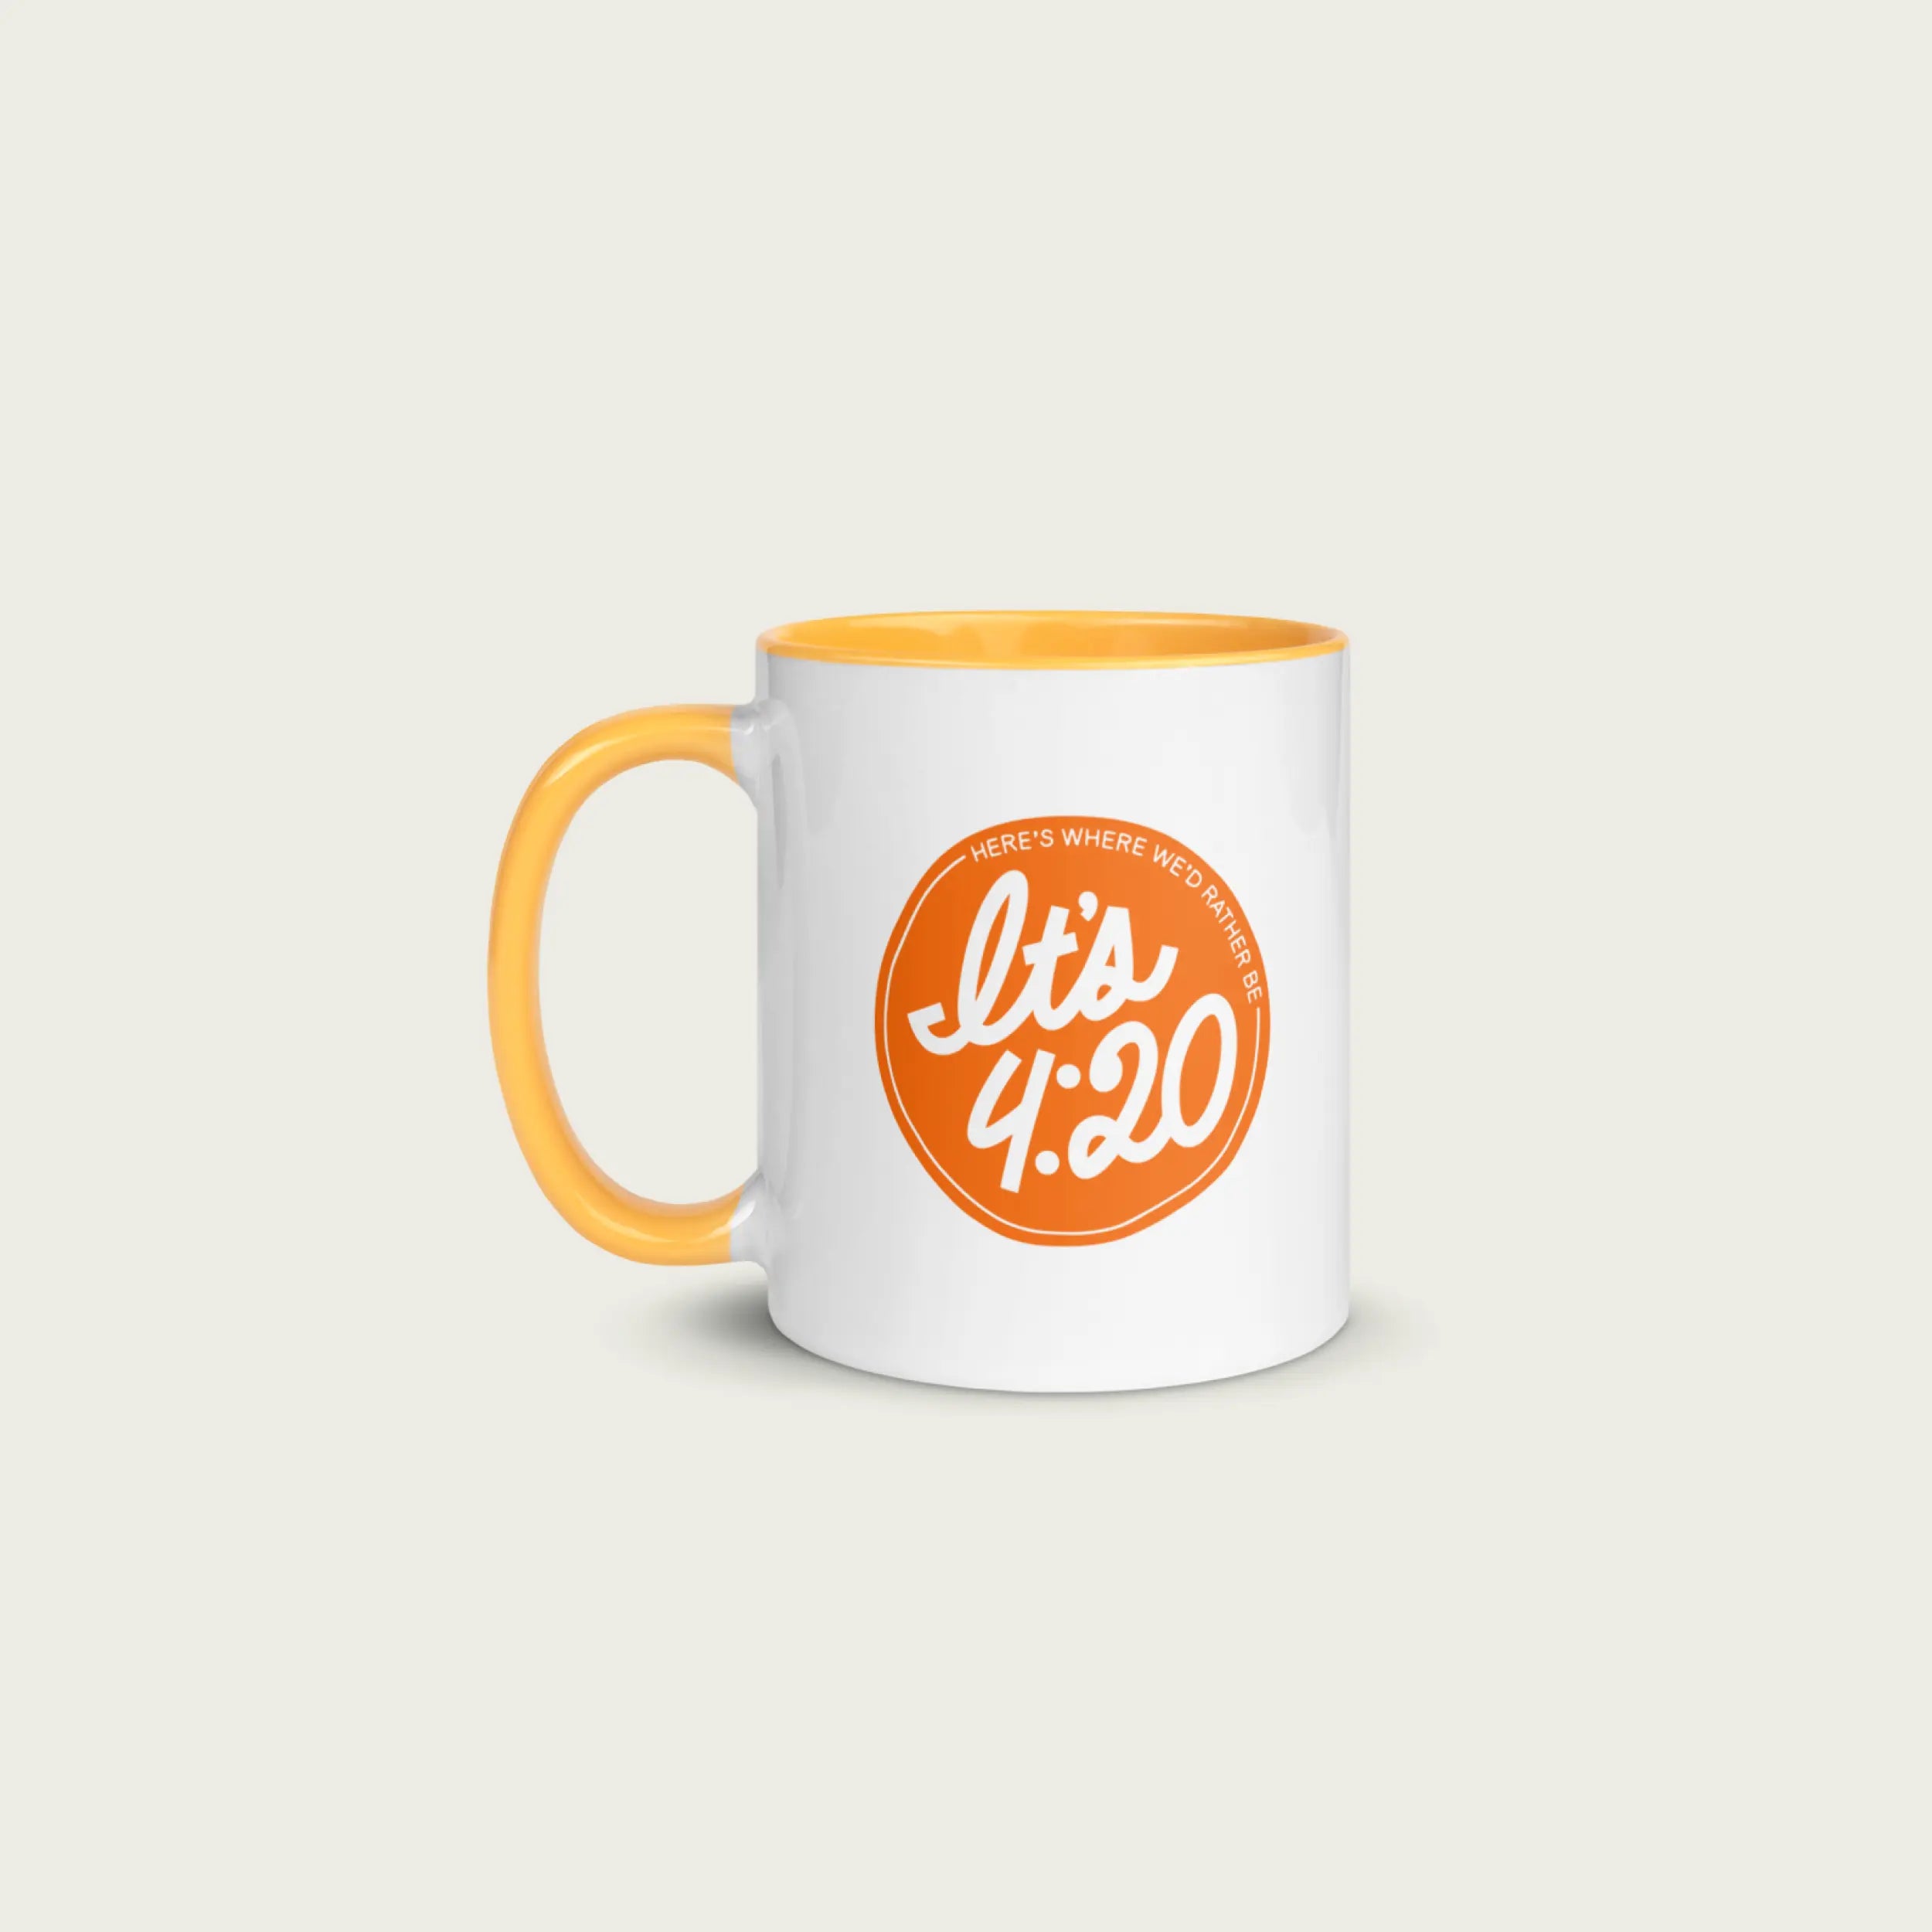 Coffee mug with 'It's 4:20, Here is Where I'd Rather Be' graphic